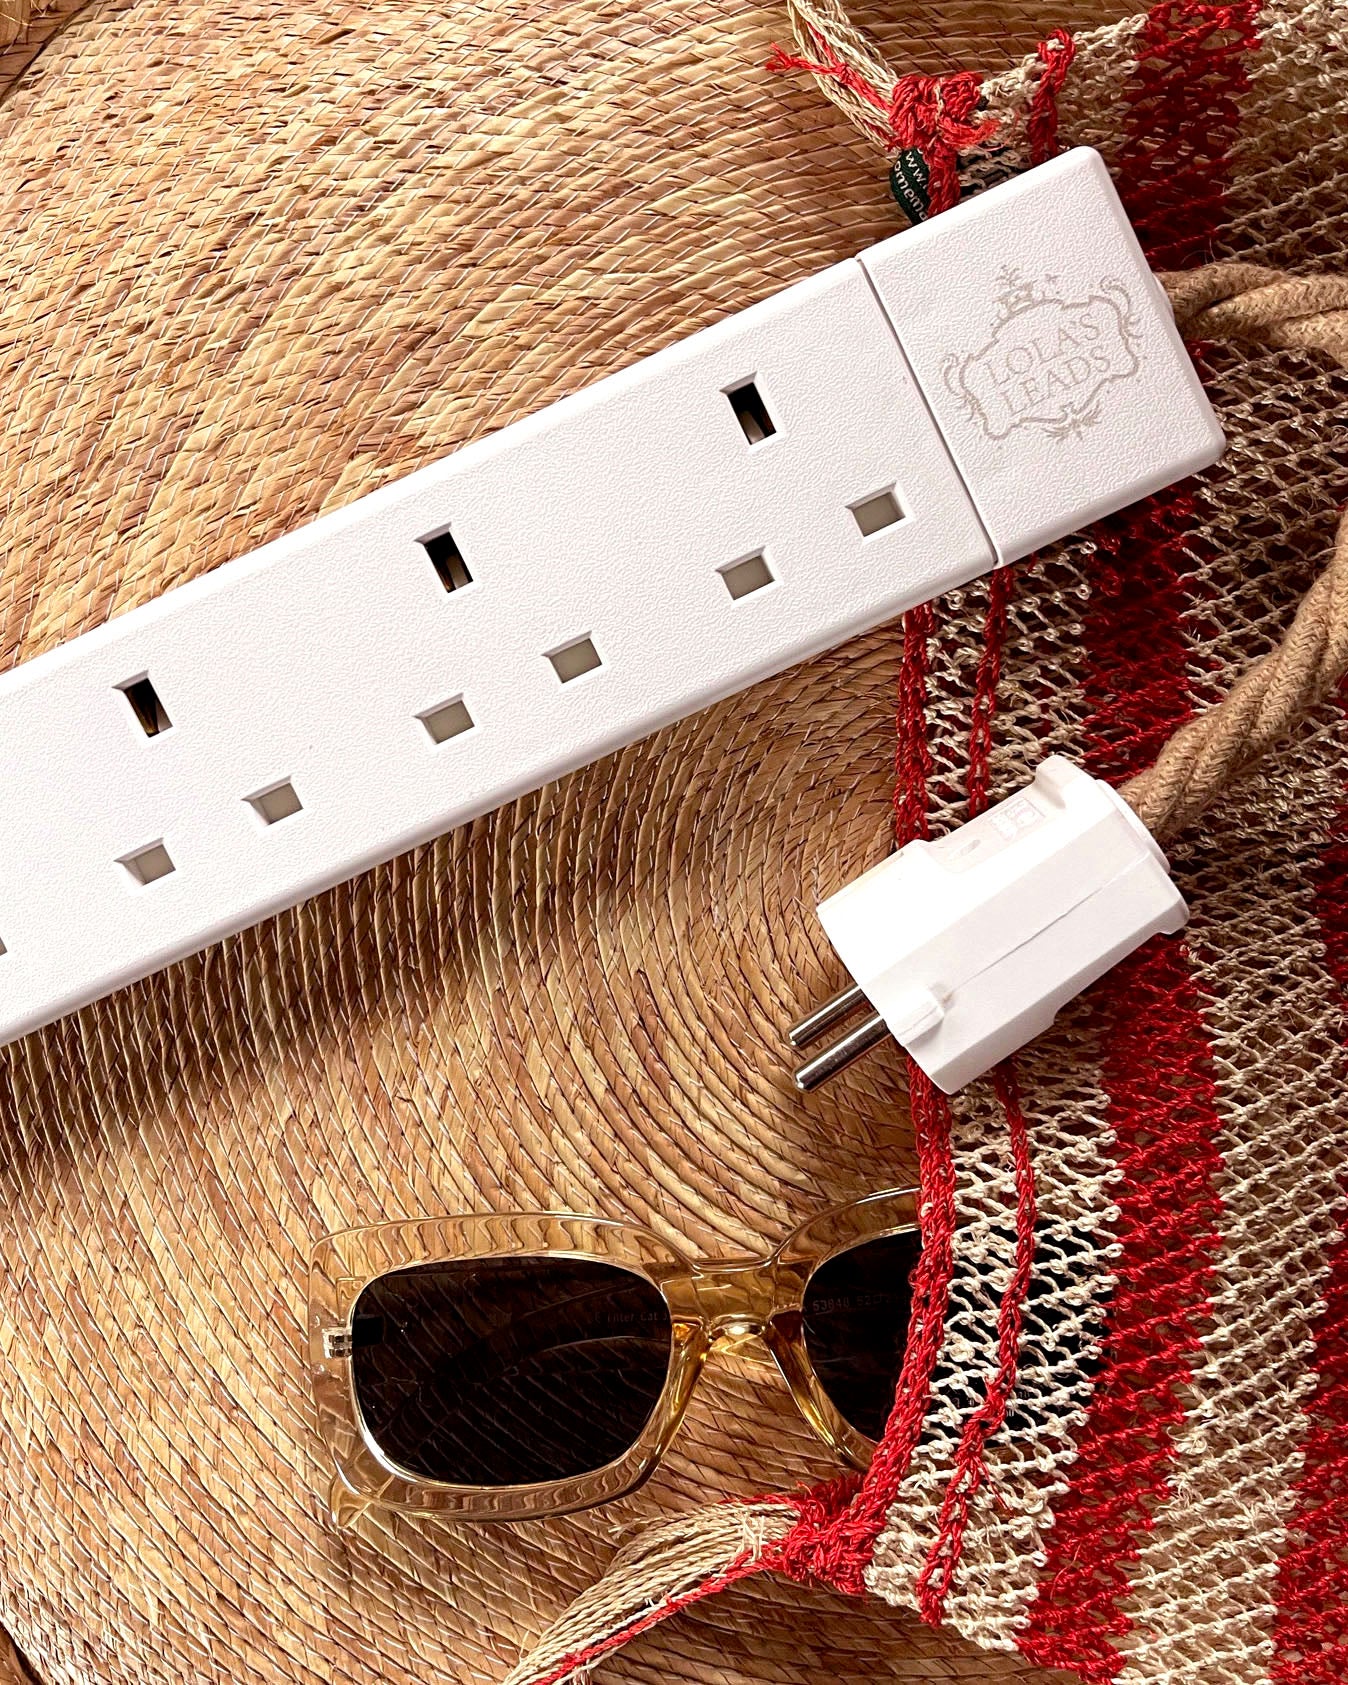 Travel Adapters